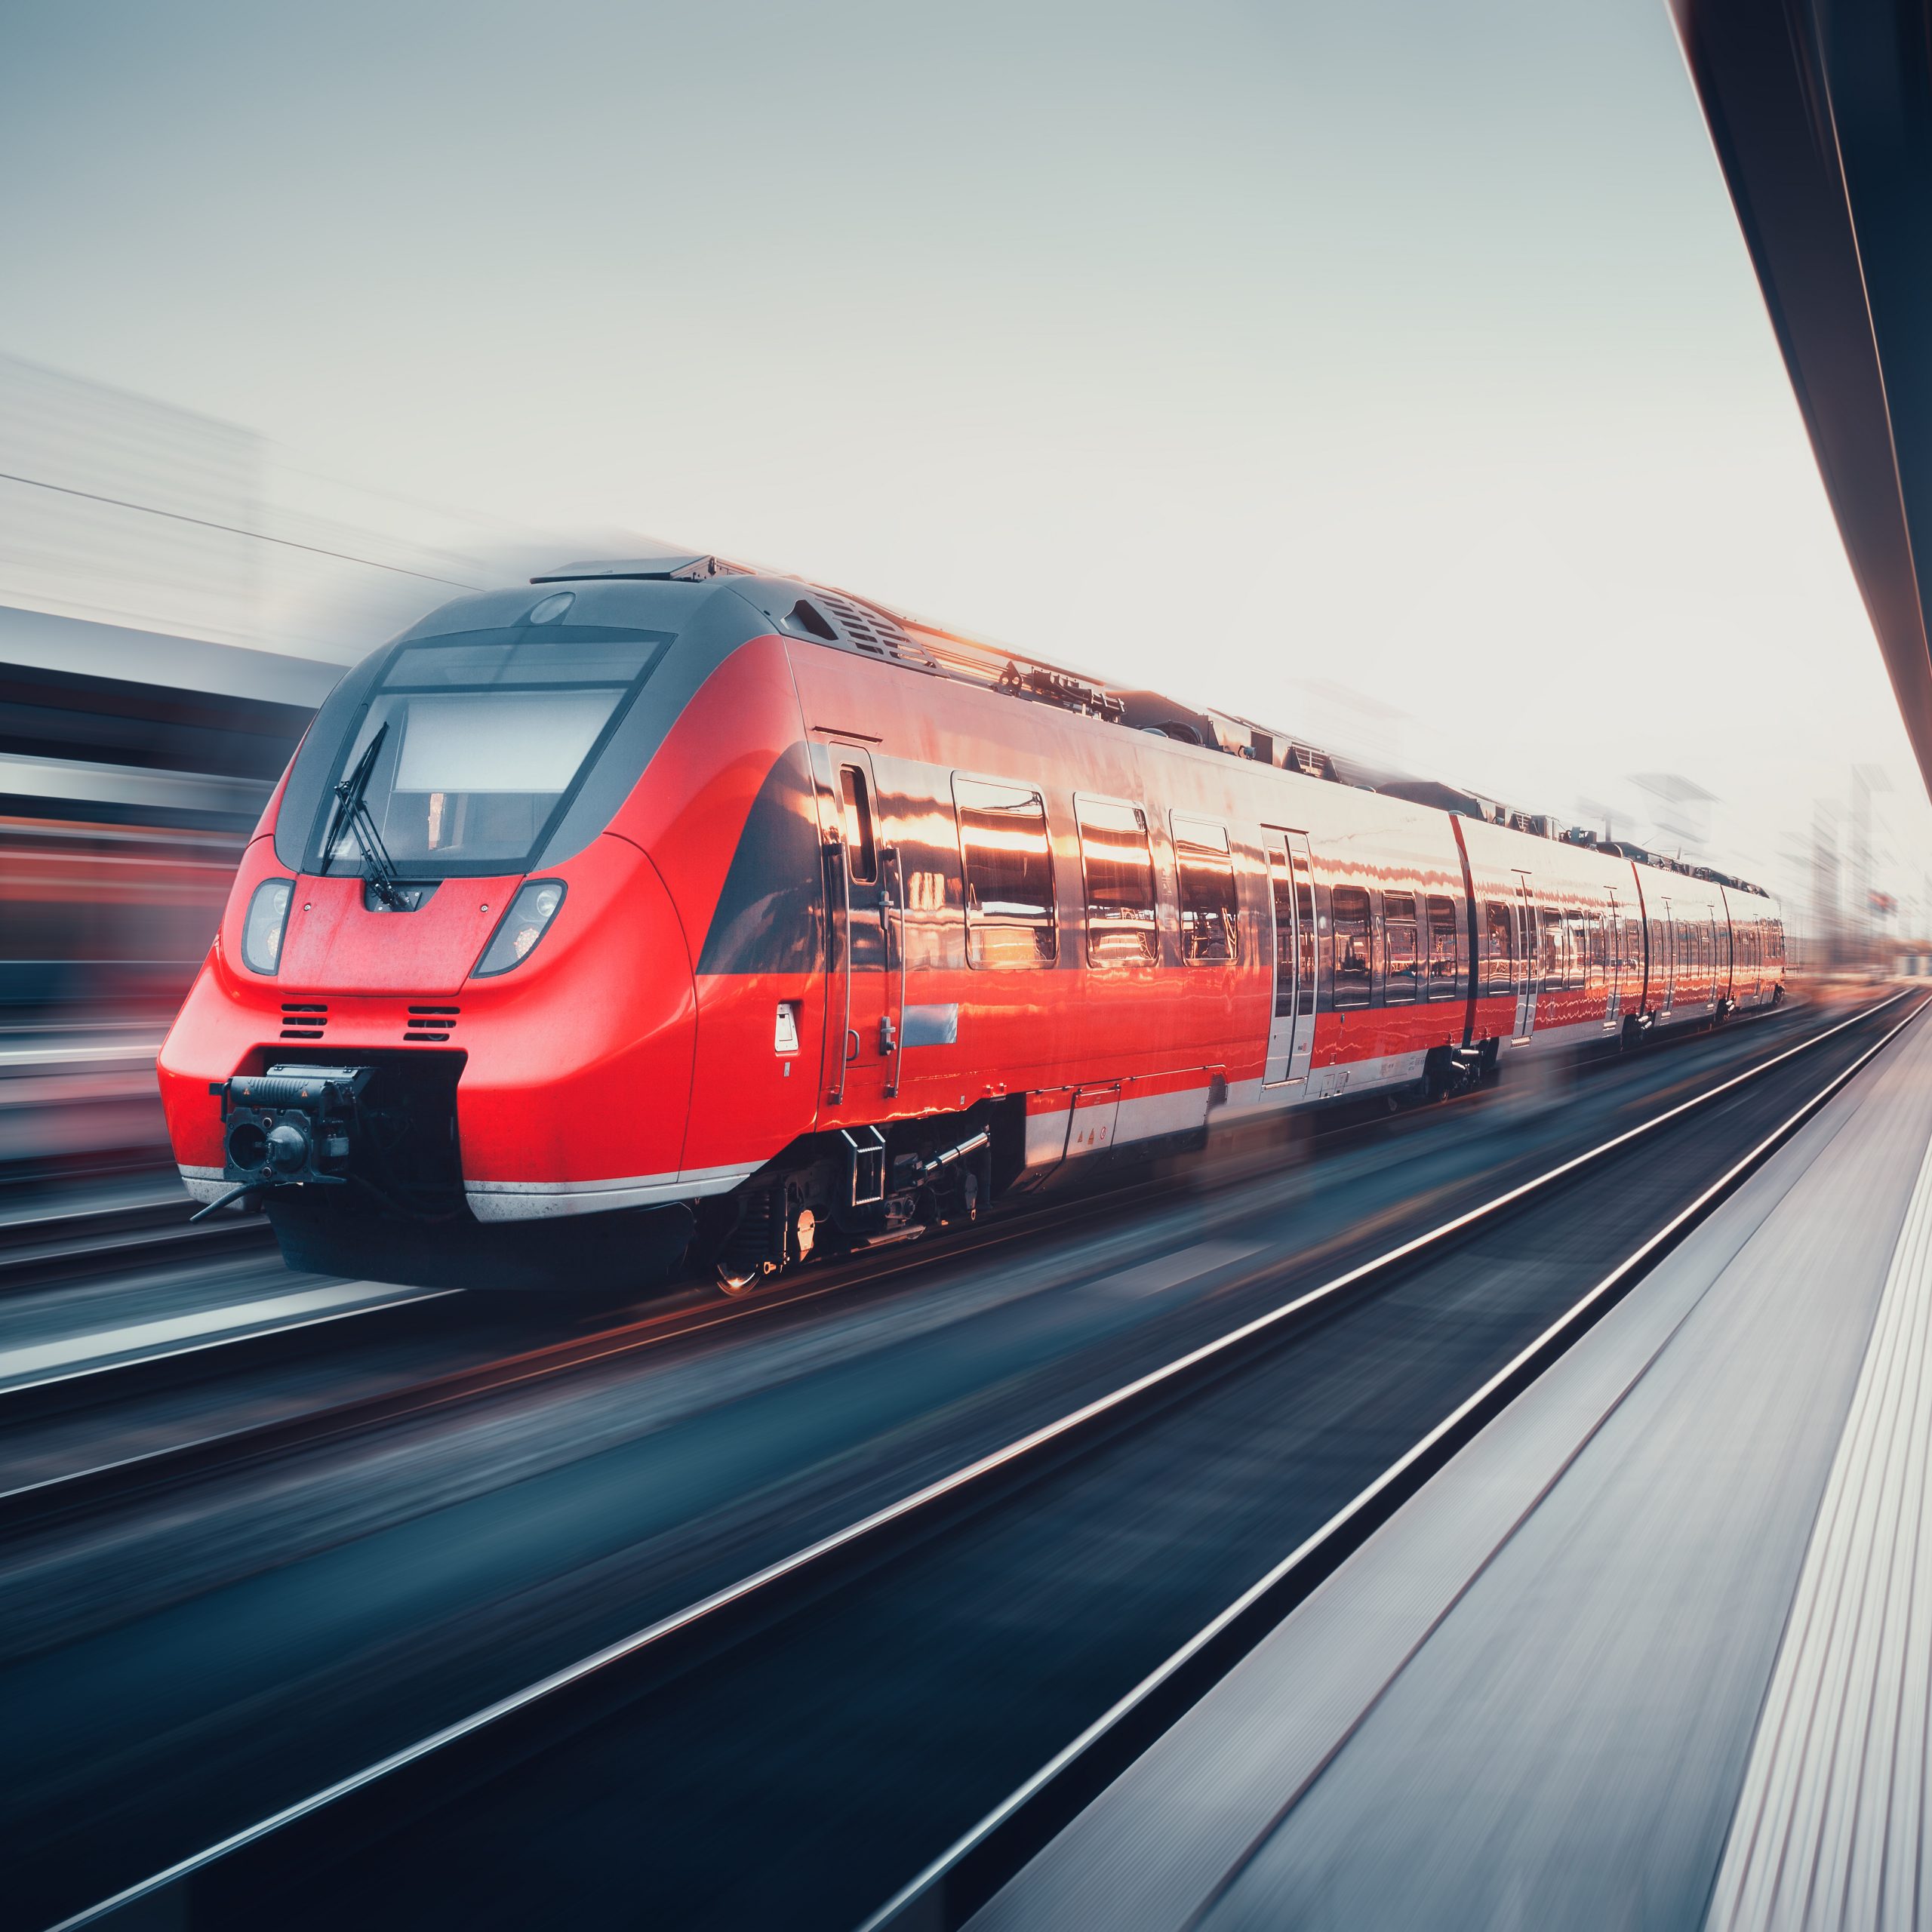 Beautiful railway station with modern high speed red commuter train with motion blur effect at sunset. Railroad. Vintage toning. Railroad travel background, tourism. Industrial